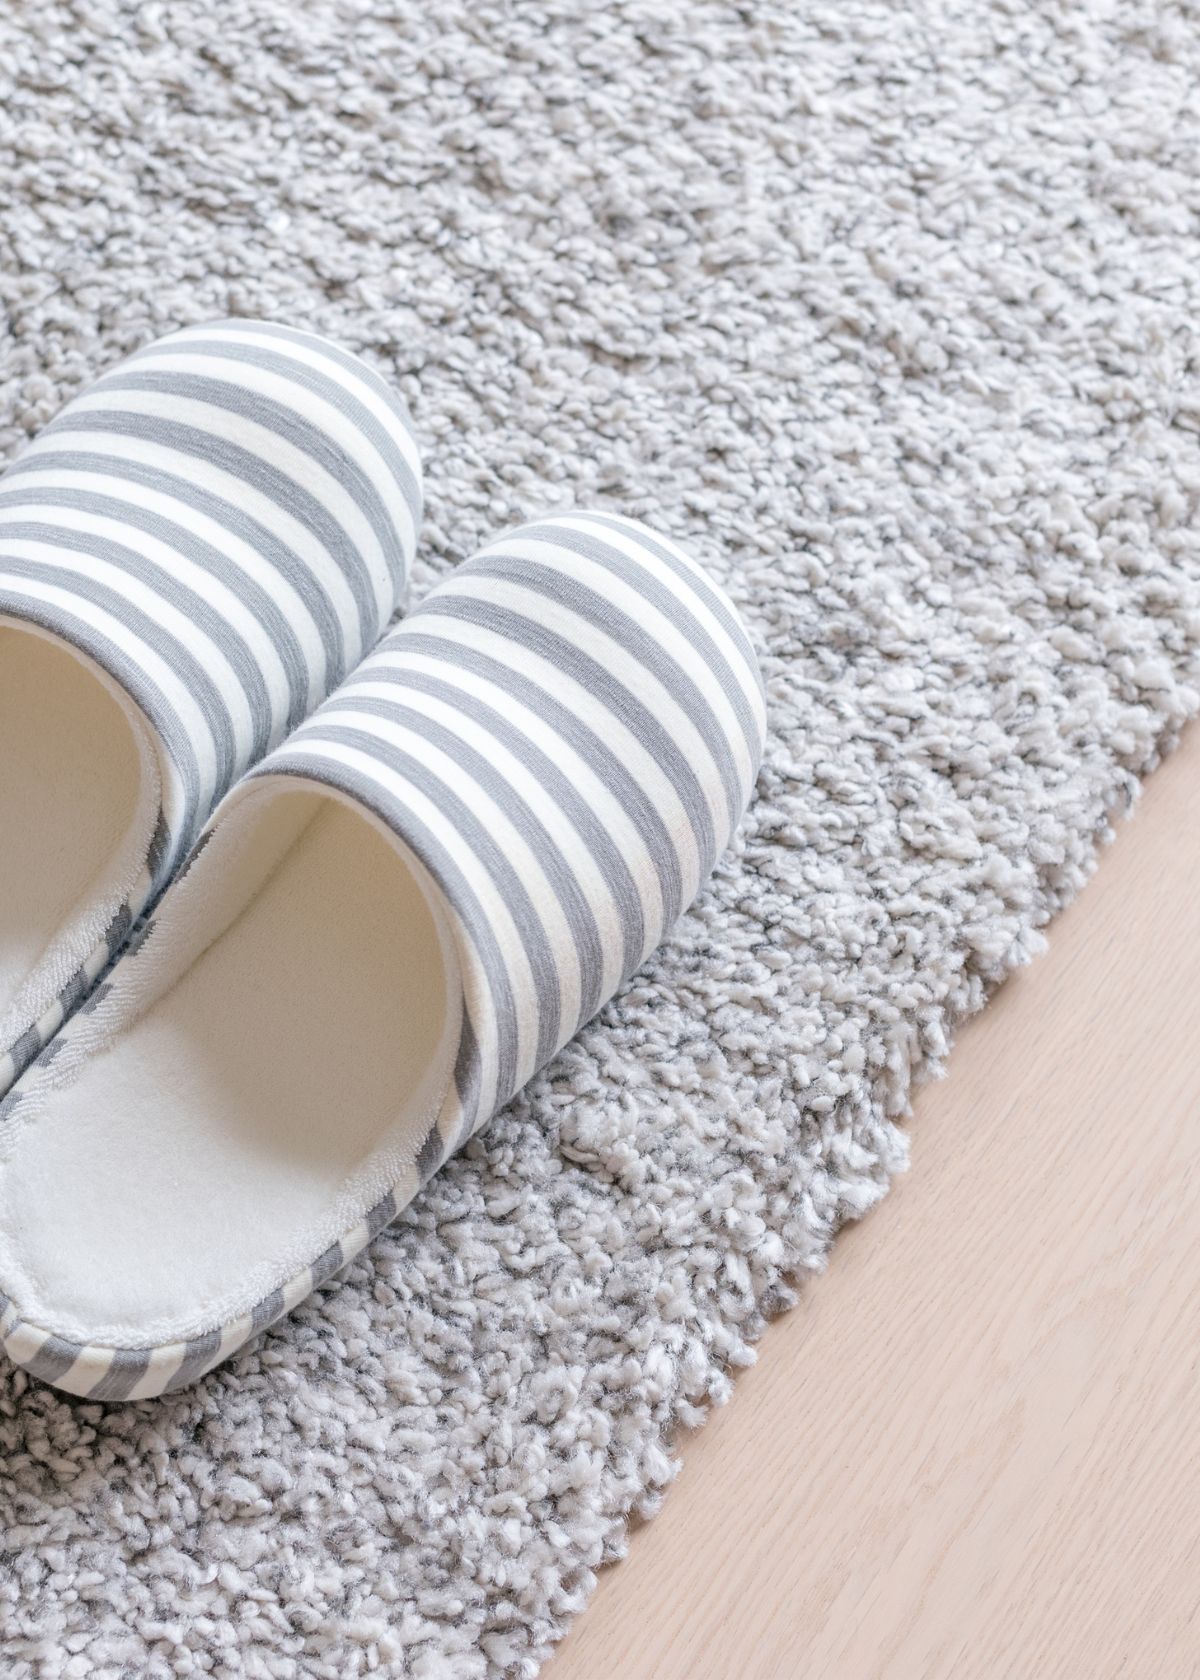 How to Dry Carpet After Cleaning